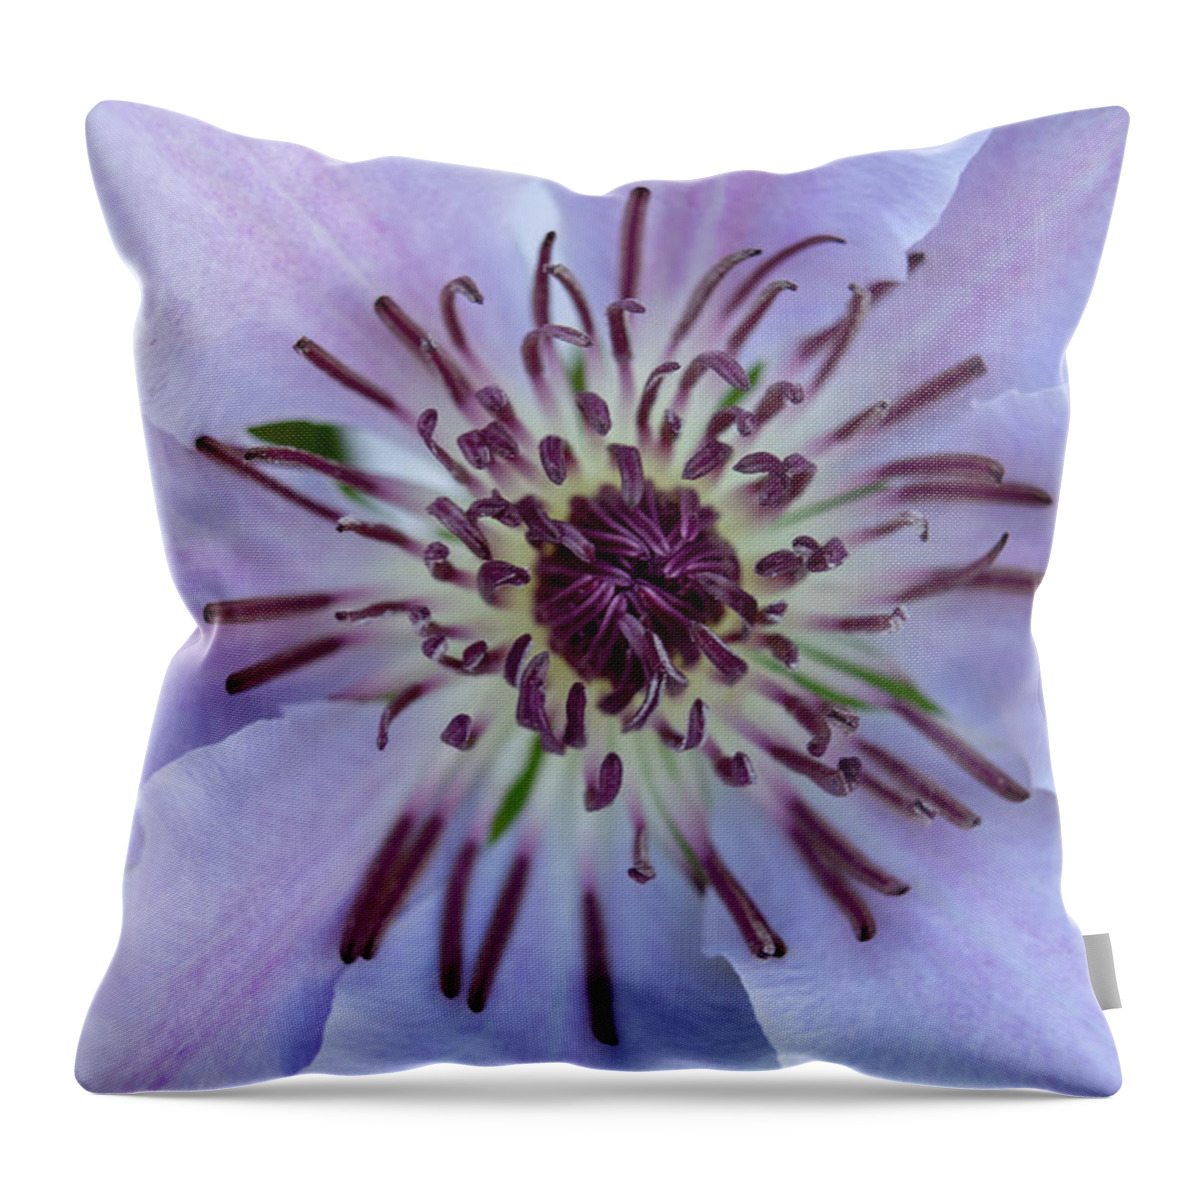  Throw Pillow featuring the photograph Spring #2 by Brian Jones